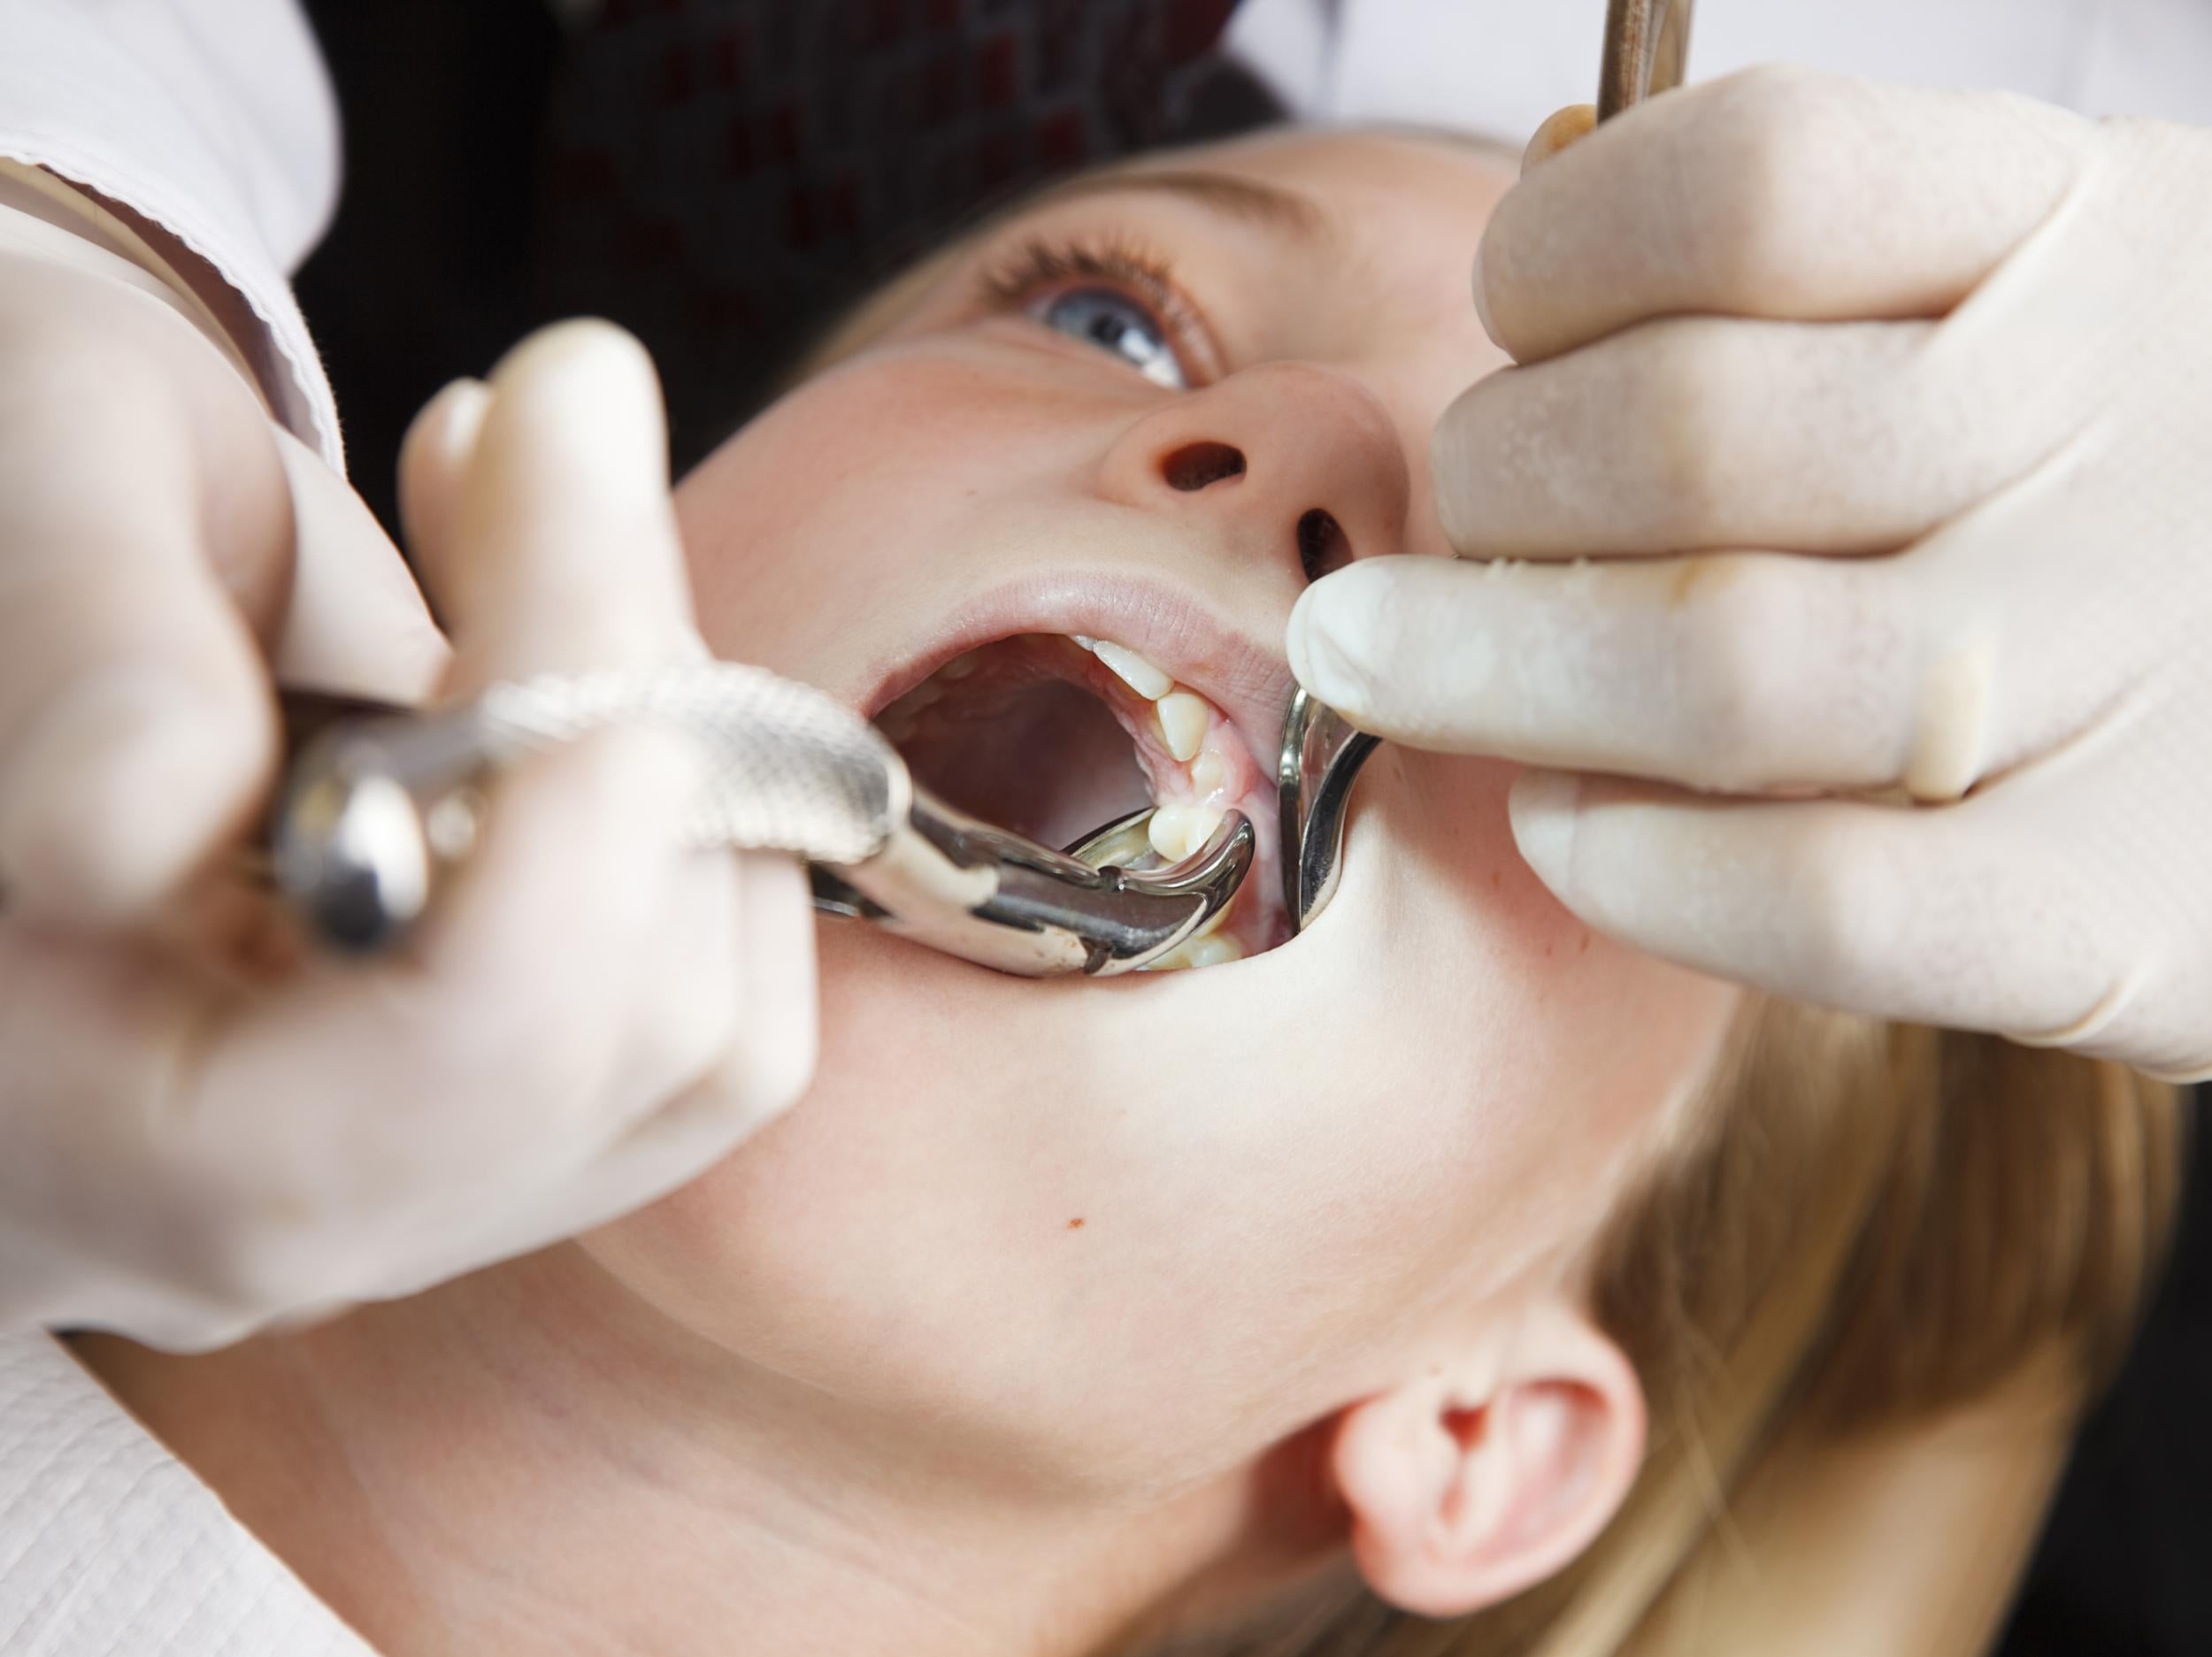 Poor dental hygiene in mothers can be passed down to their children, a new study has found